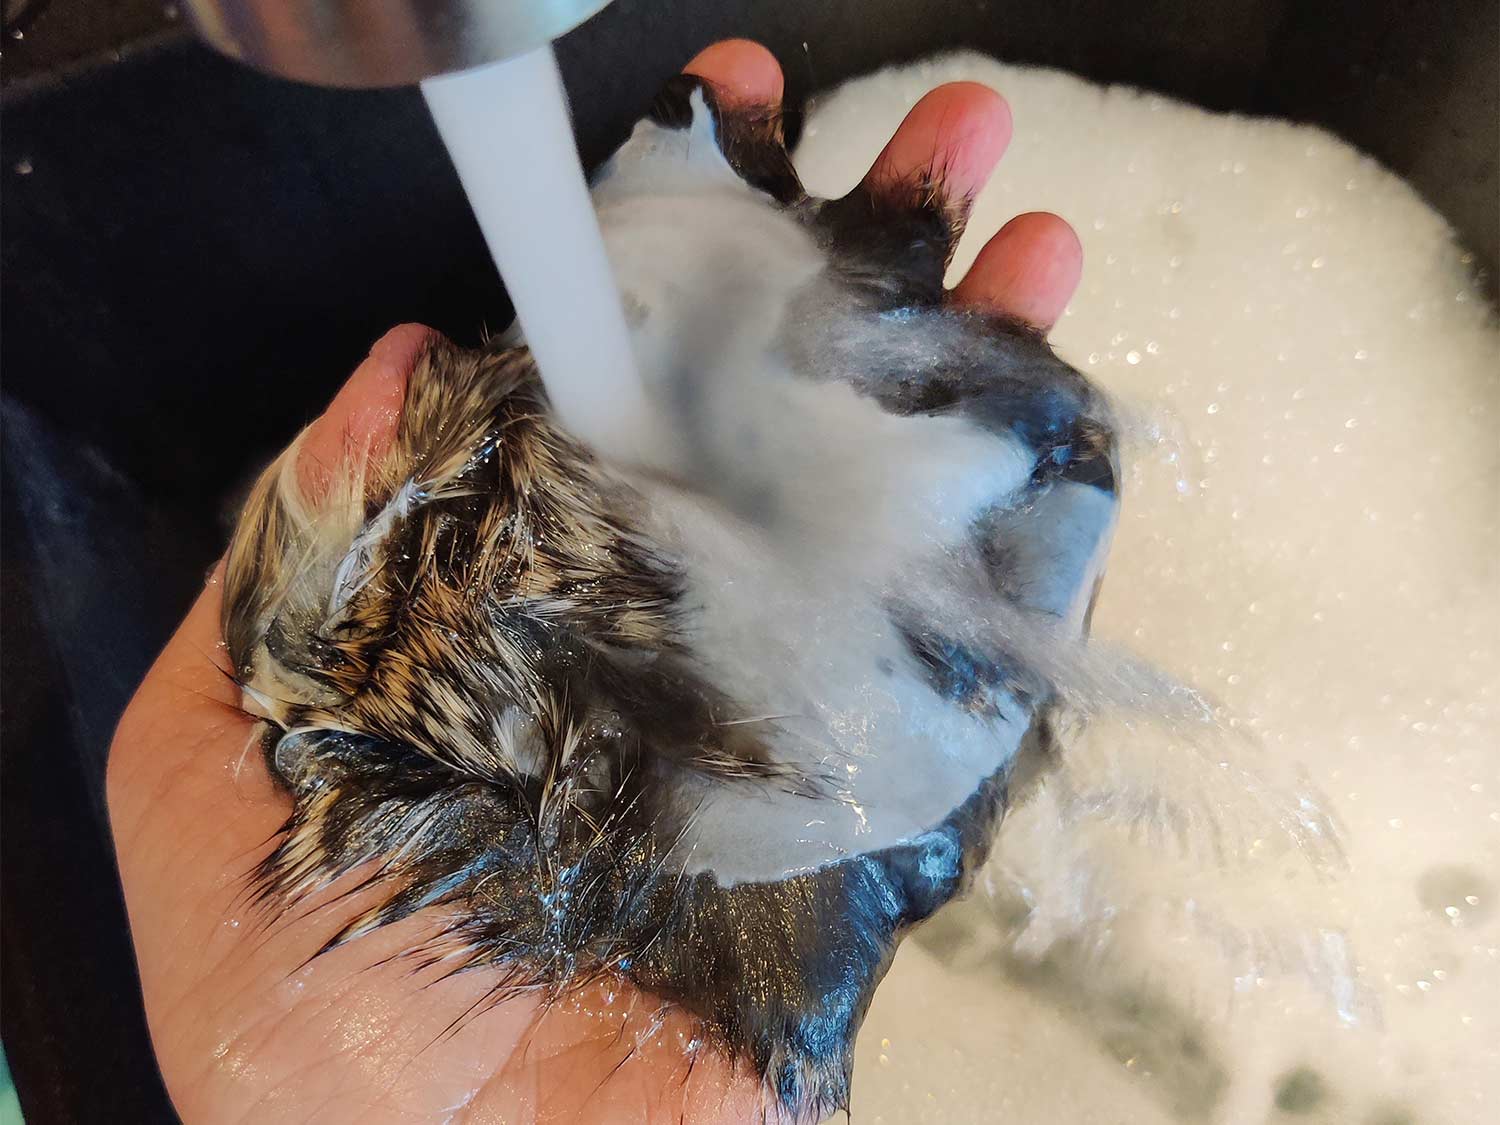 Rinsing off a rabbit hide under a water faucet.